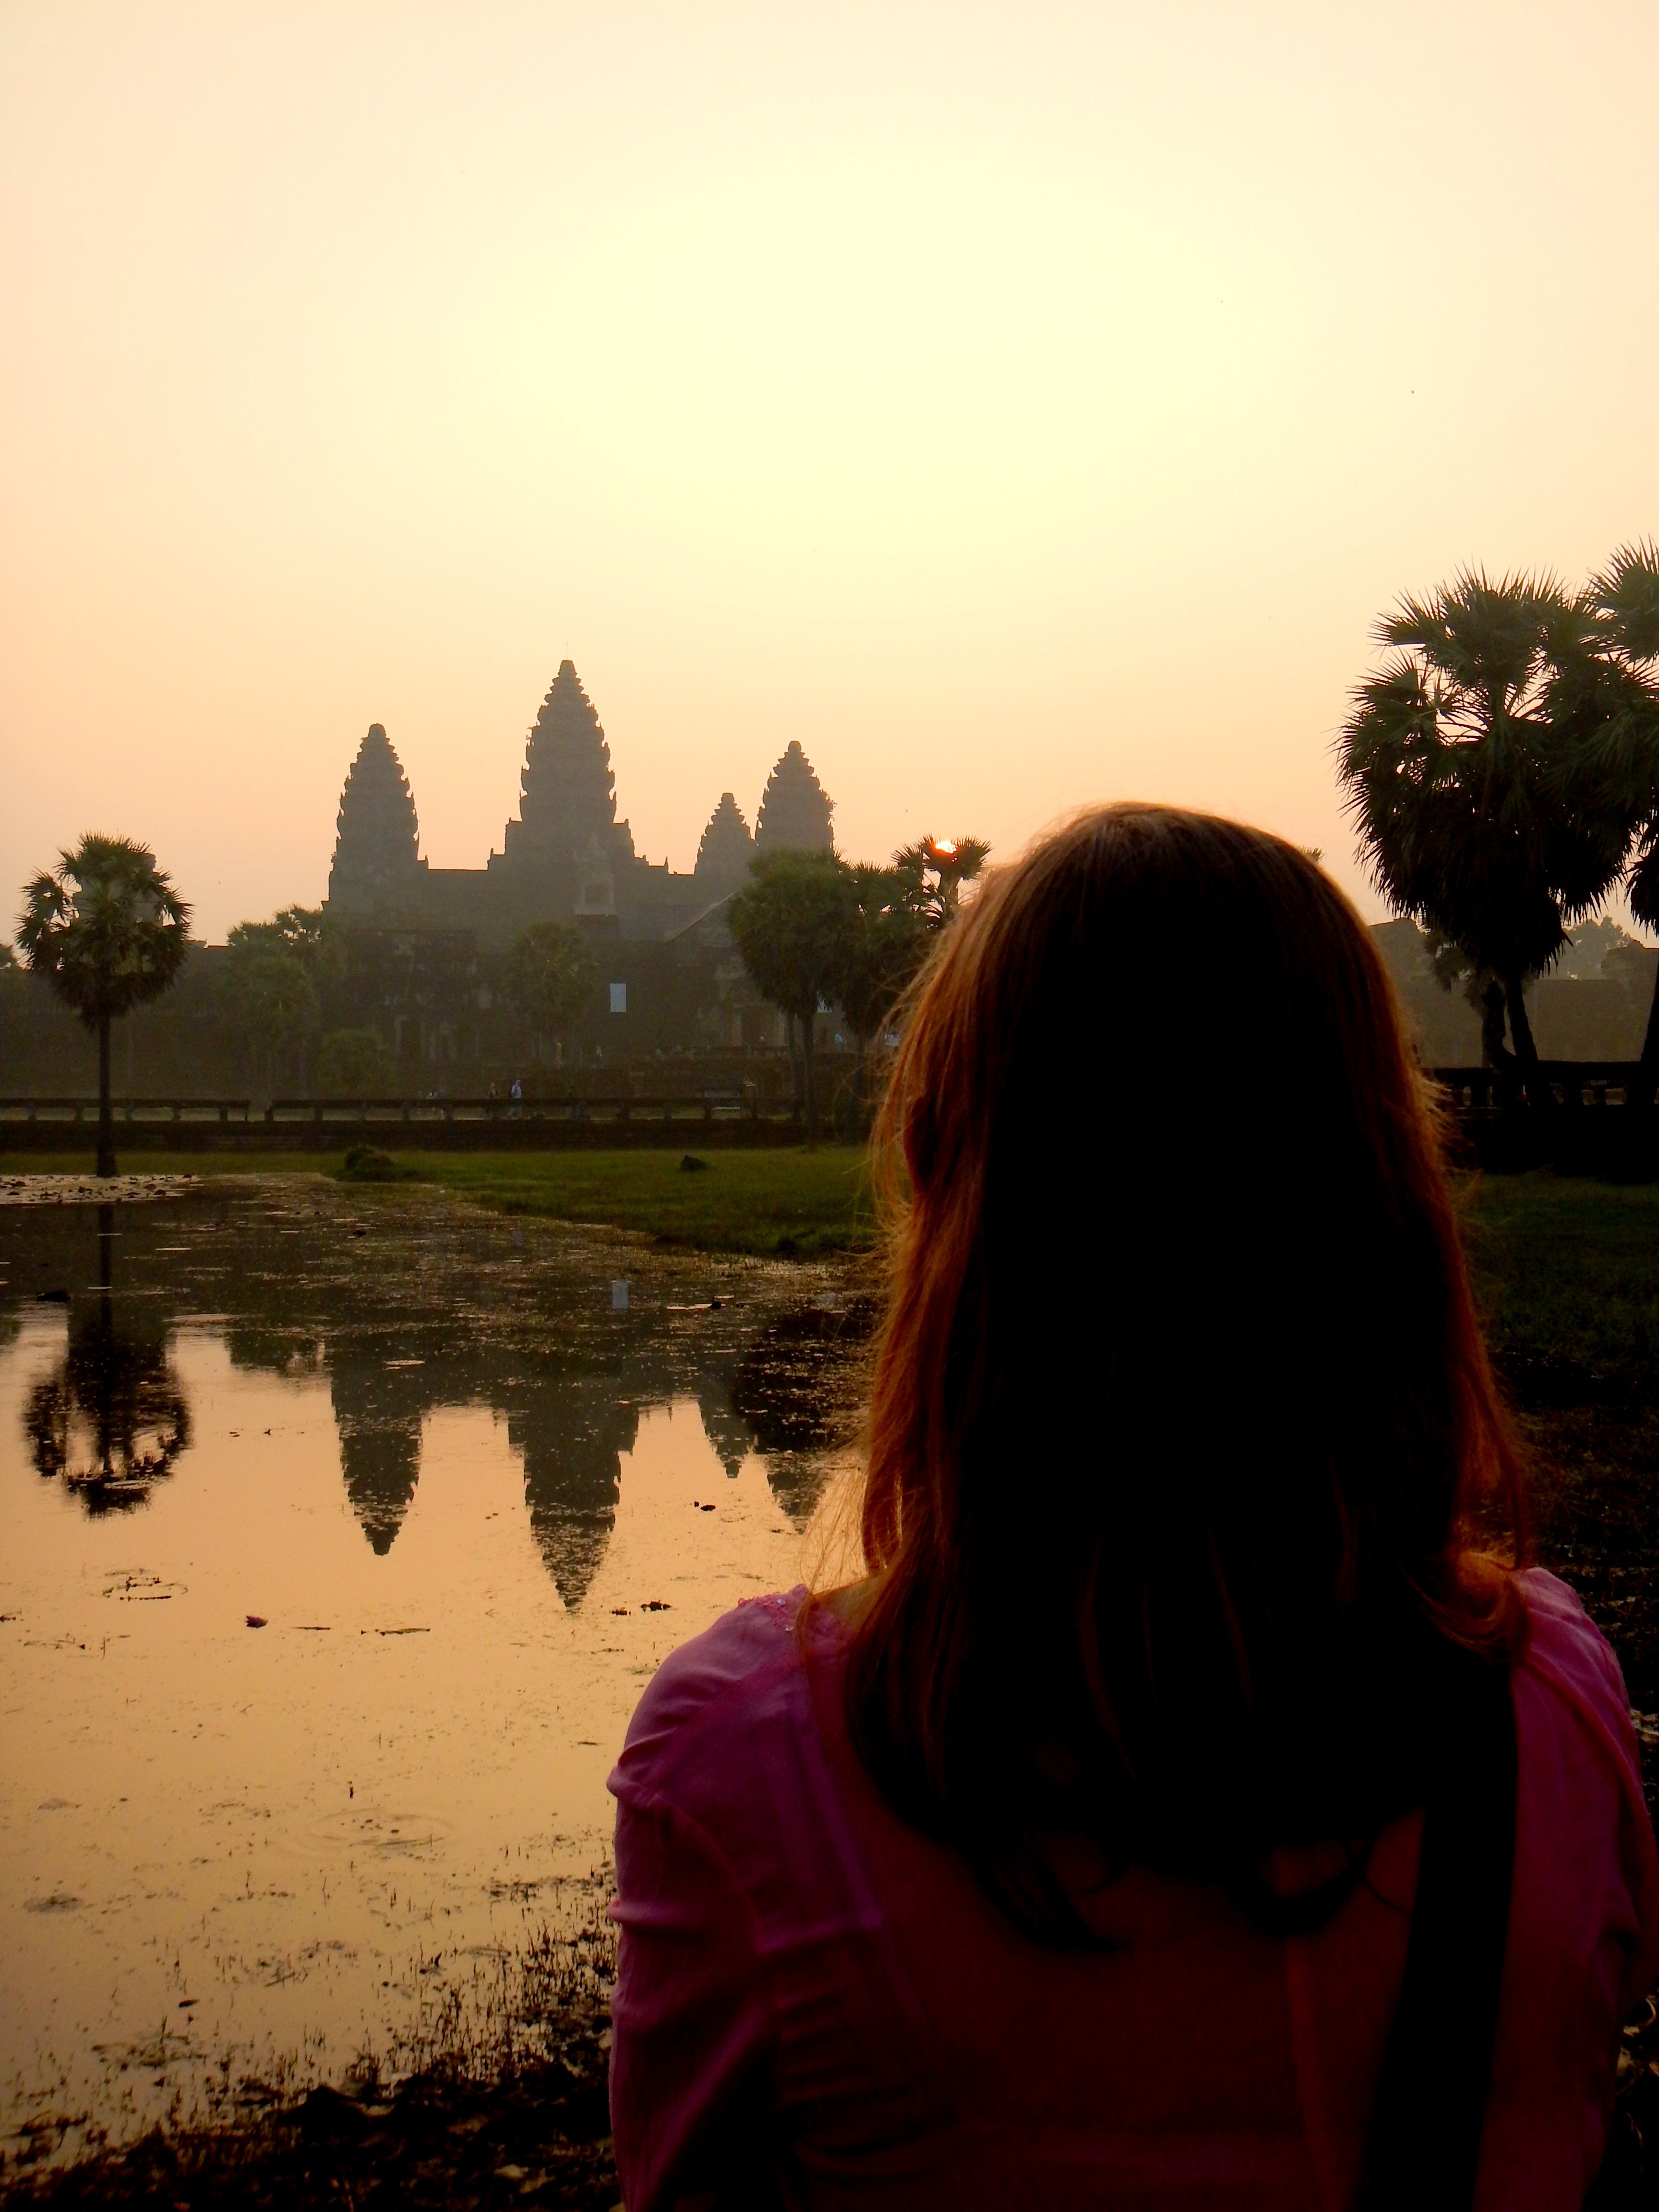 Watching the sun rise over Angkor Wat, Cambodia